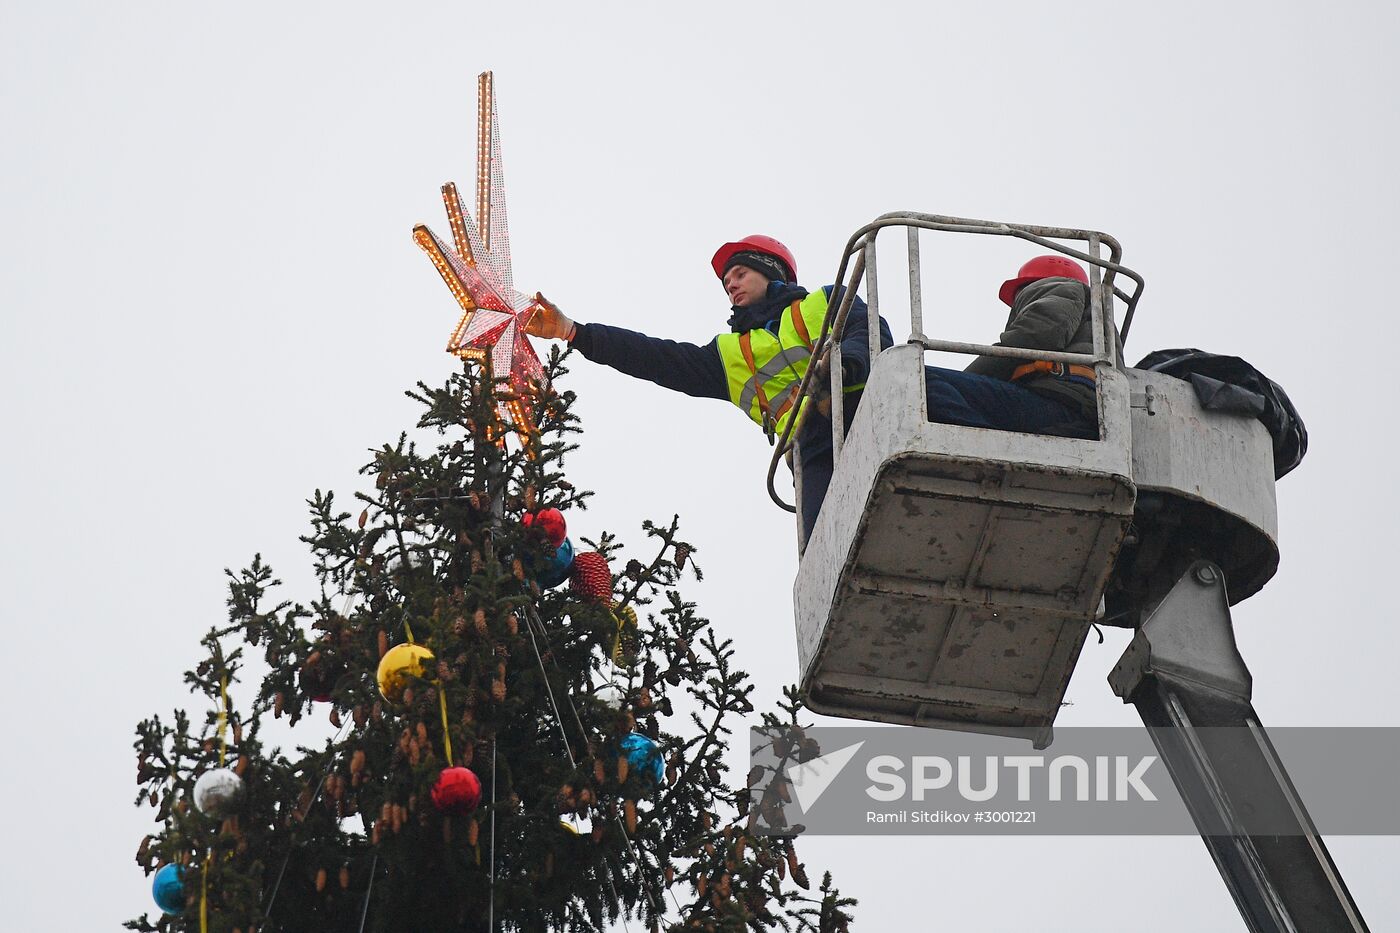 Decoration of the Christmas Tree in the Moscow Kremlin's Cathedral Square